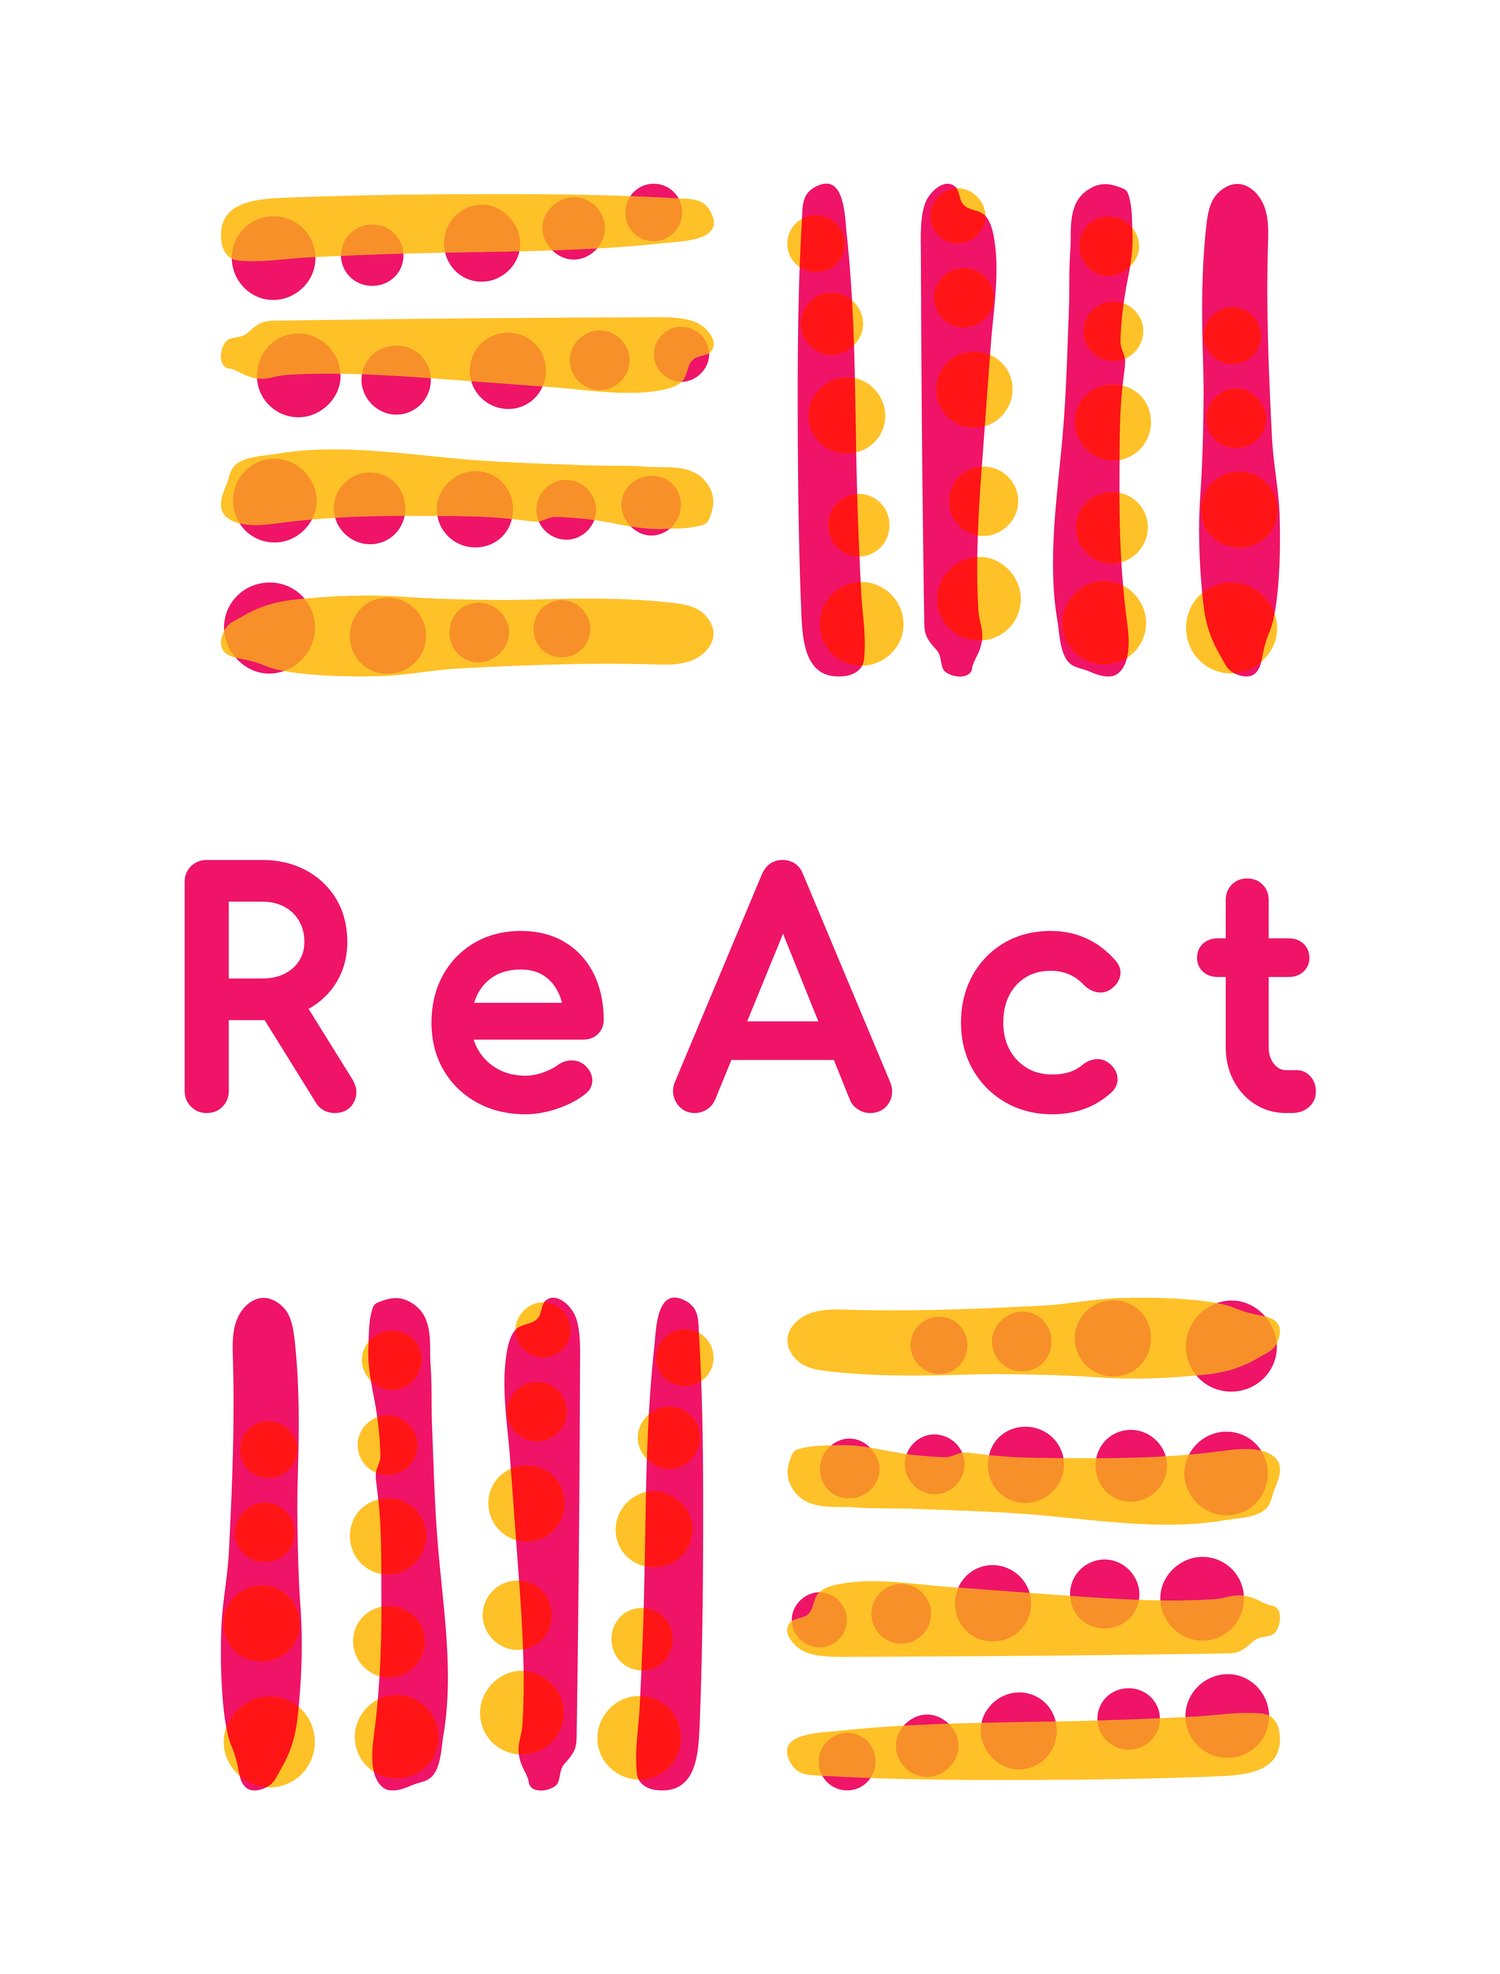 ReAct - Resilience in Action